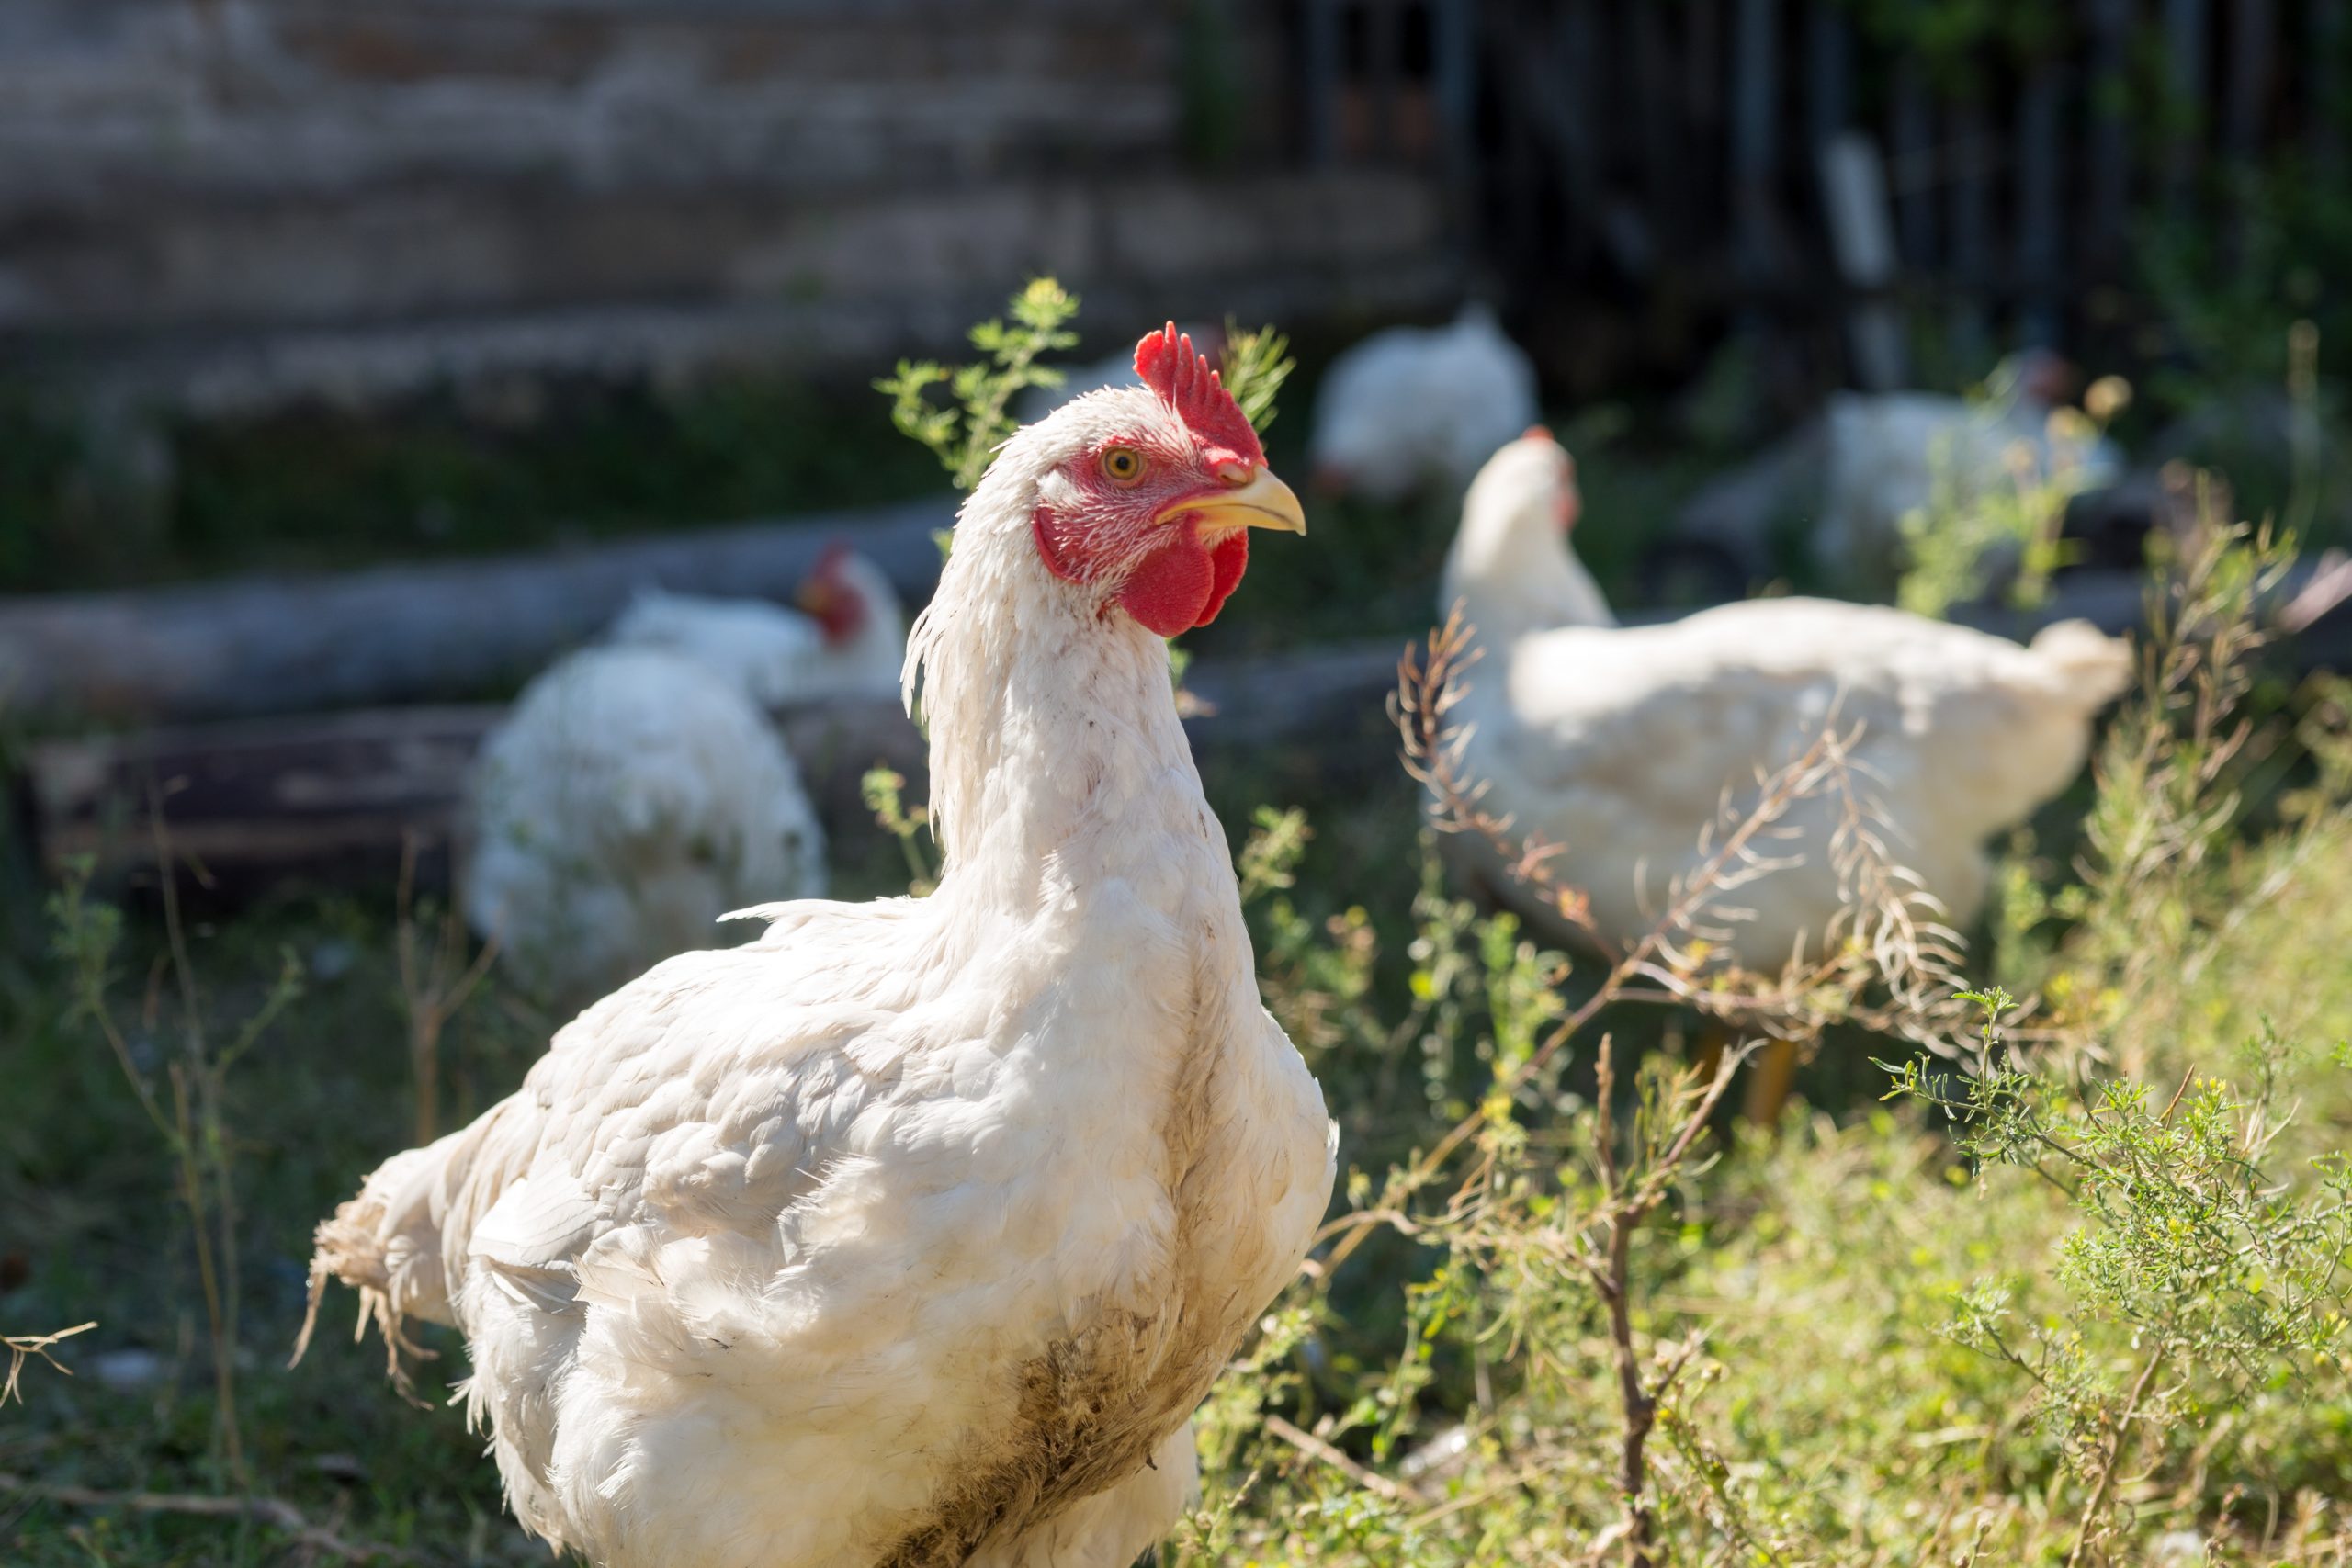 how are pasture raised chickens treated